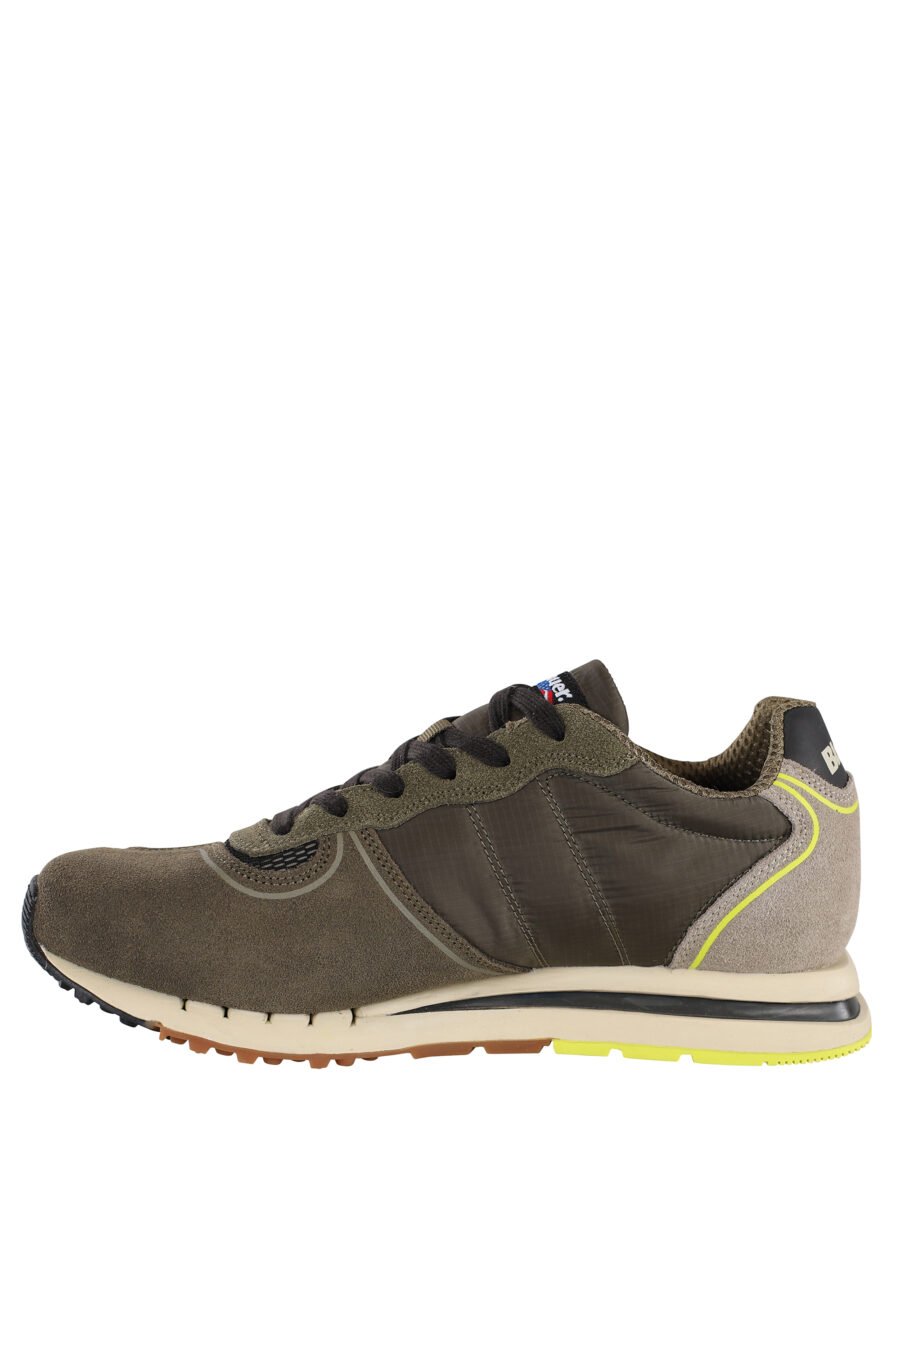 Trainers "quartz" multicoloured military green with breathable mesh - IMG 6835